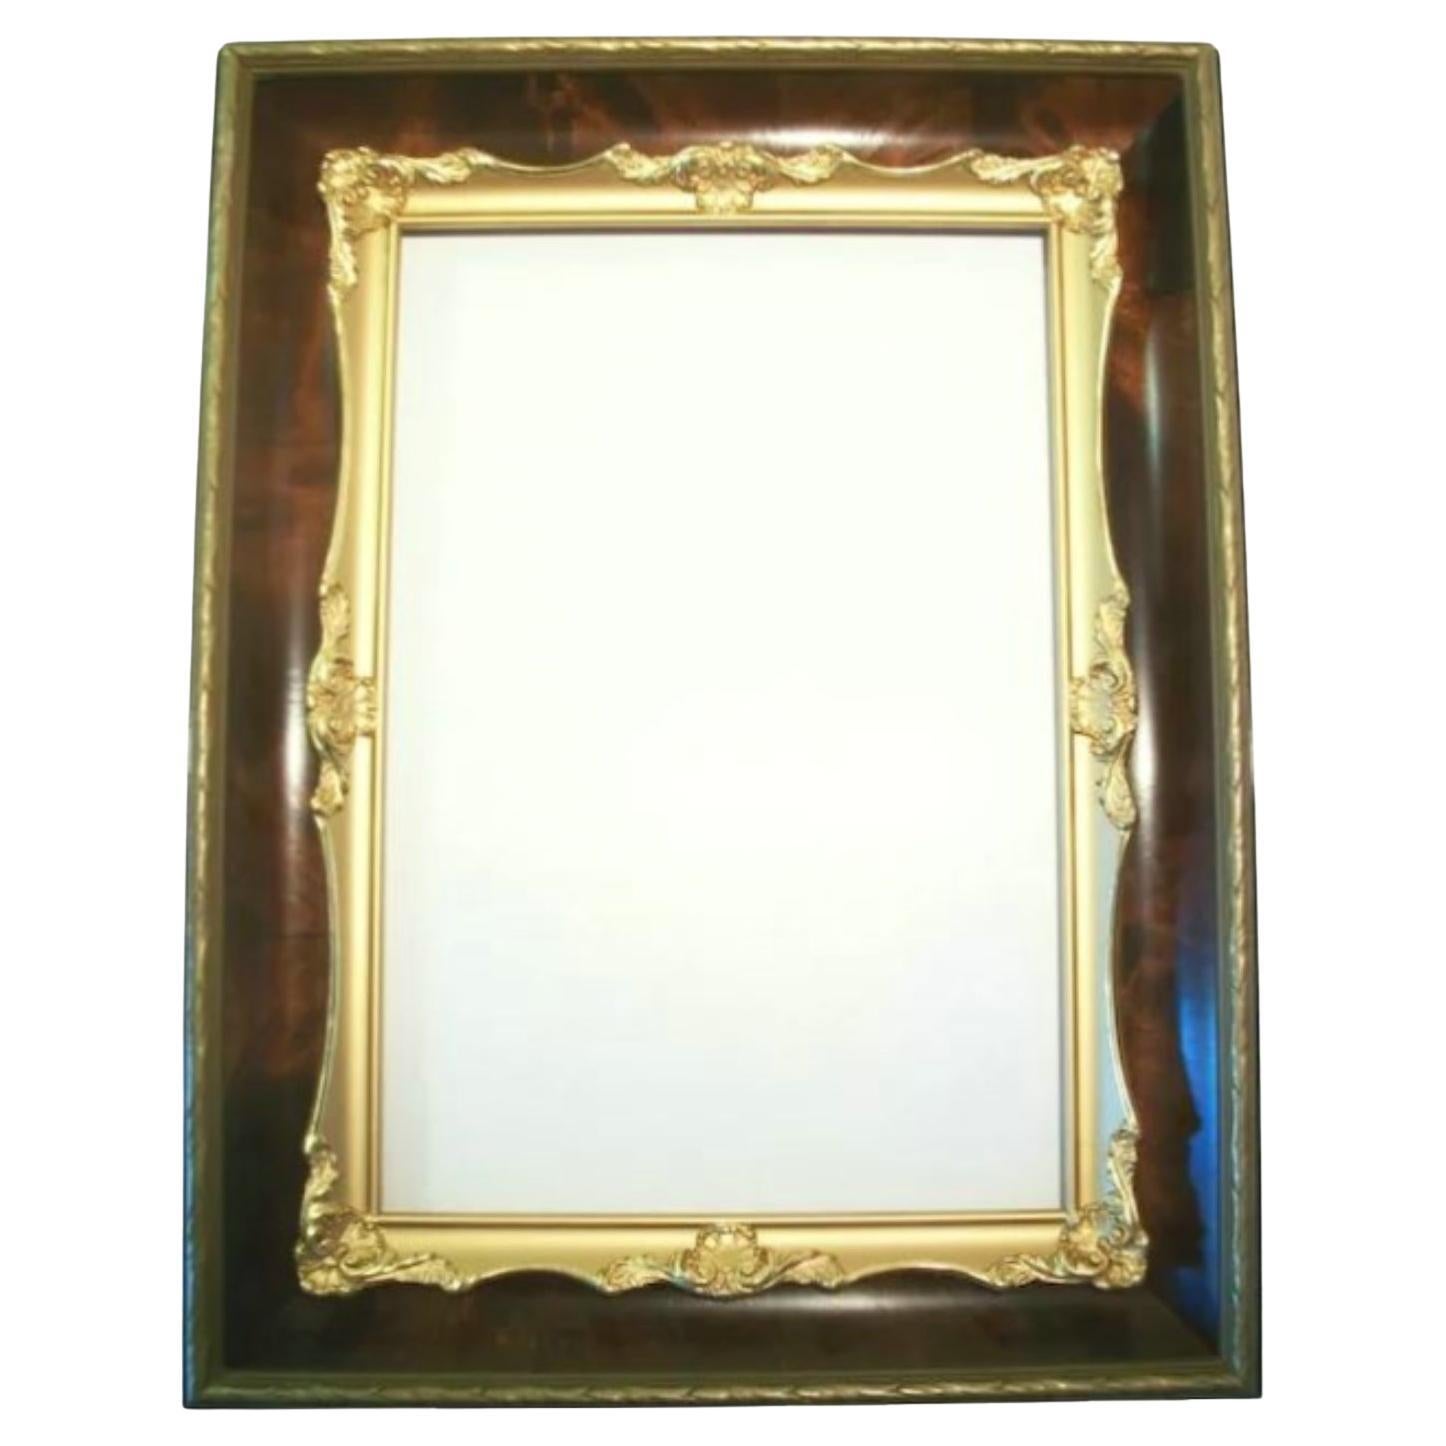 Antique Louis XVI Style Gilt Picture Frame, Early 20th Century